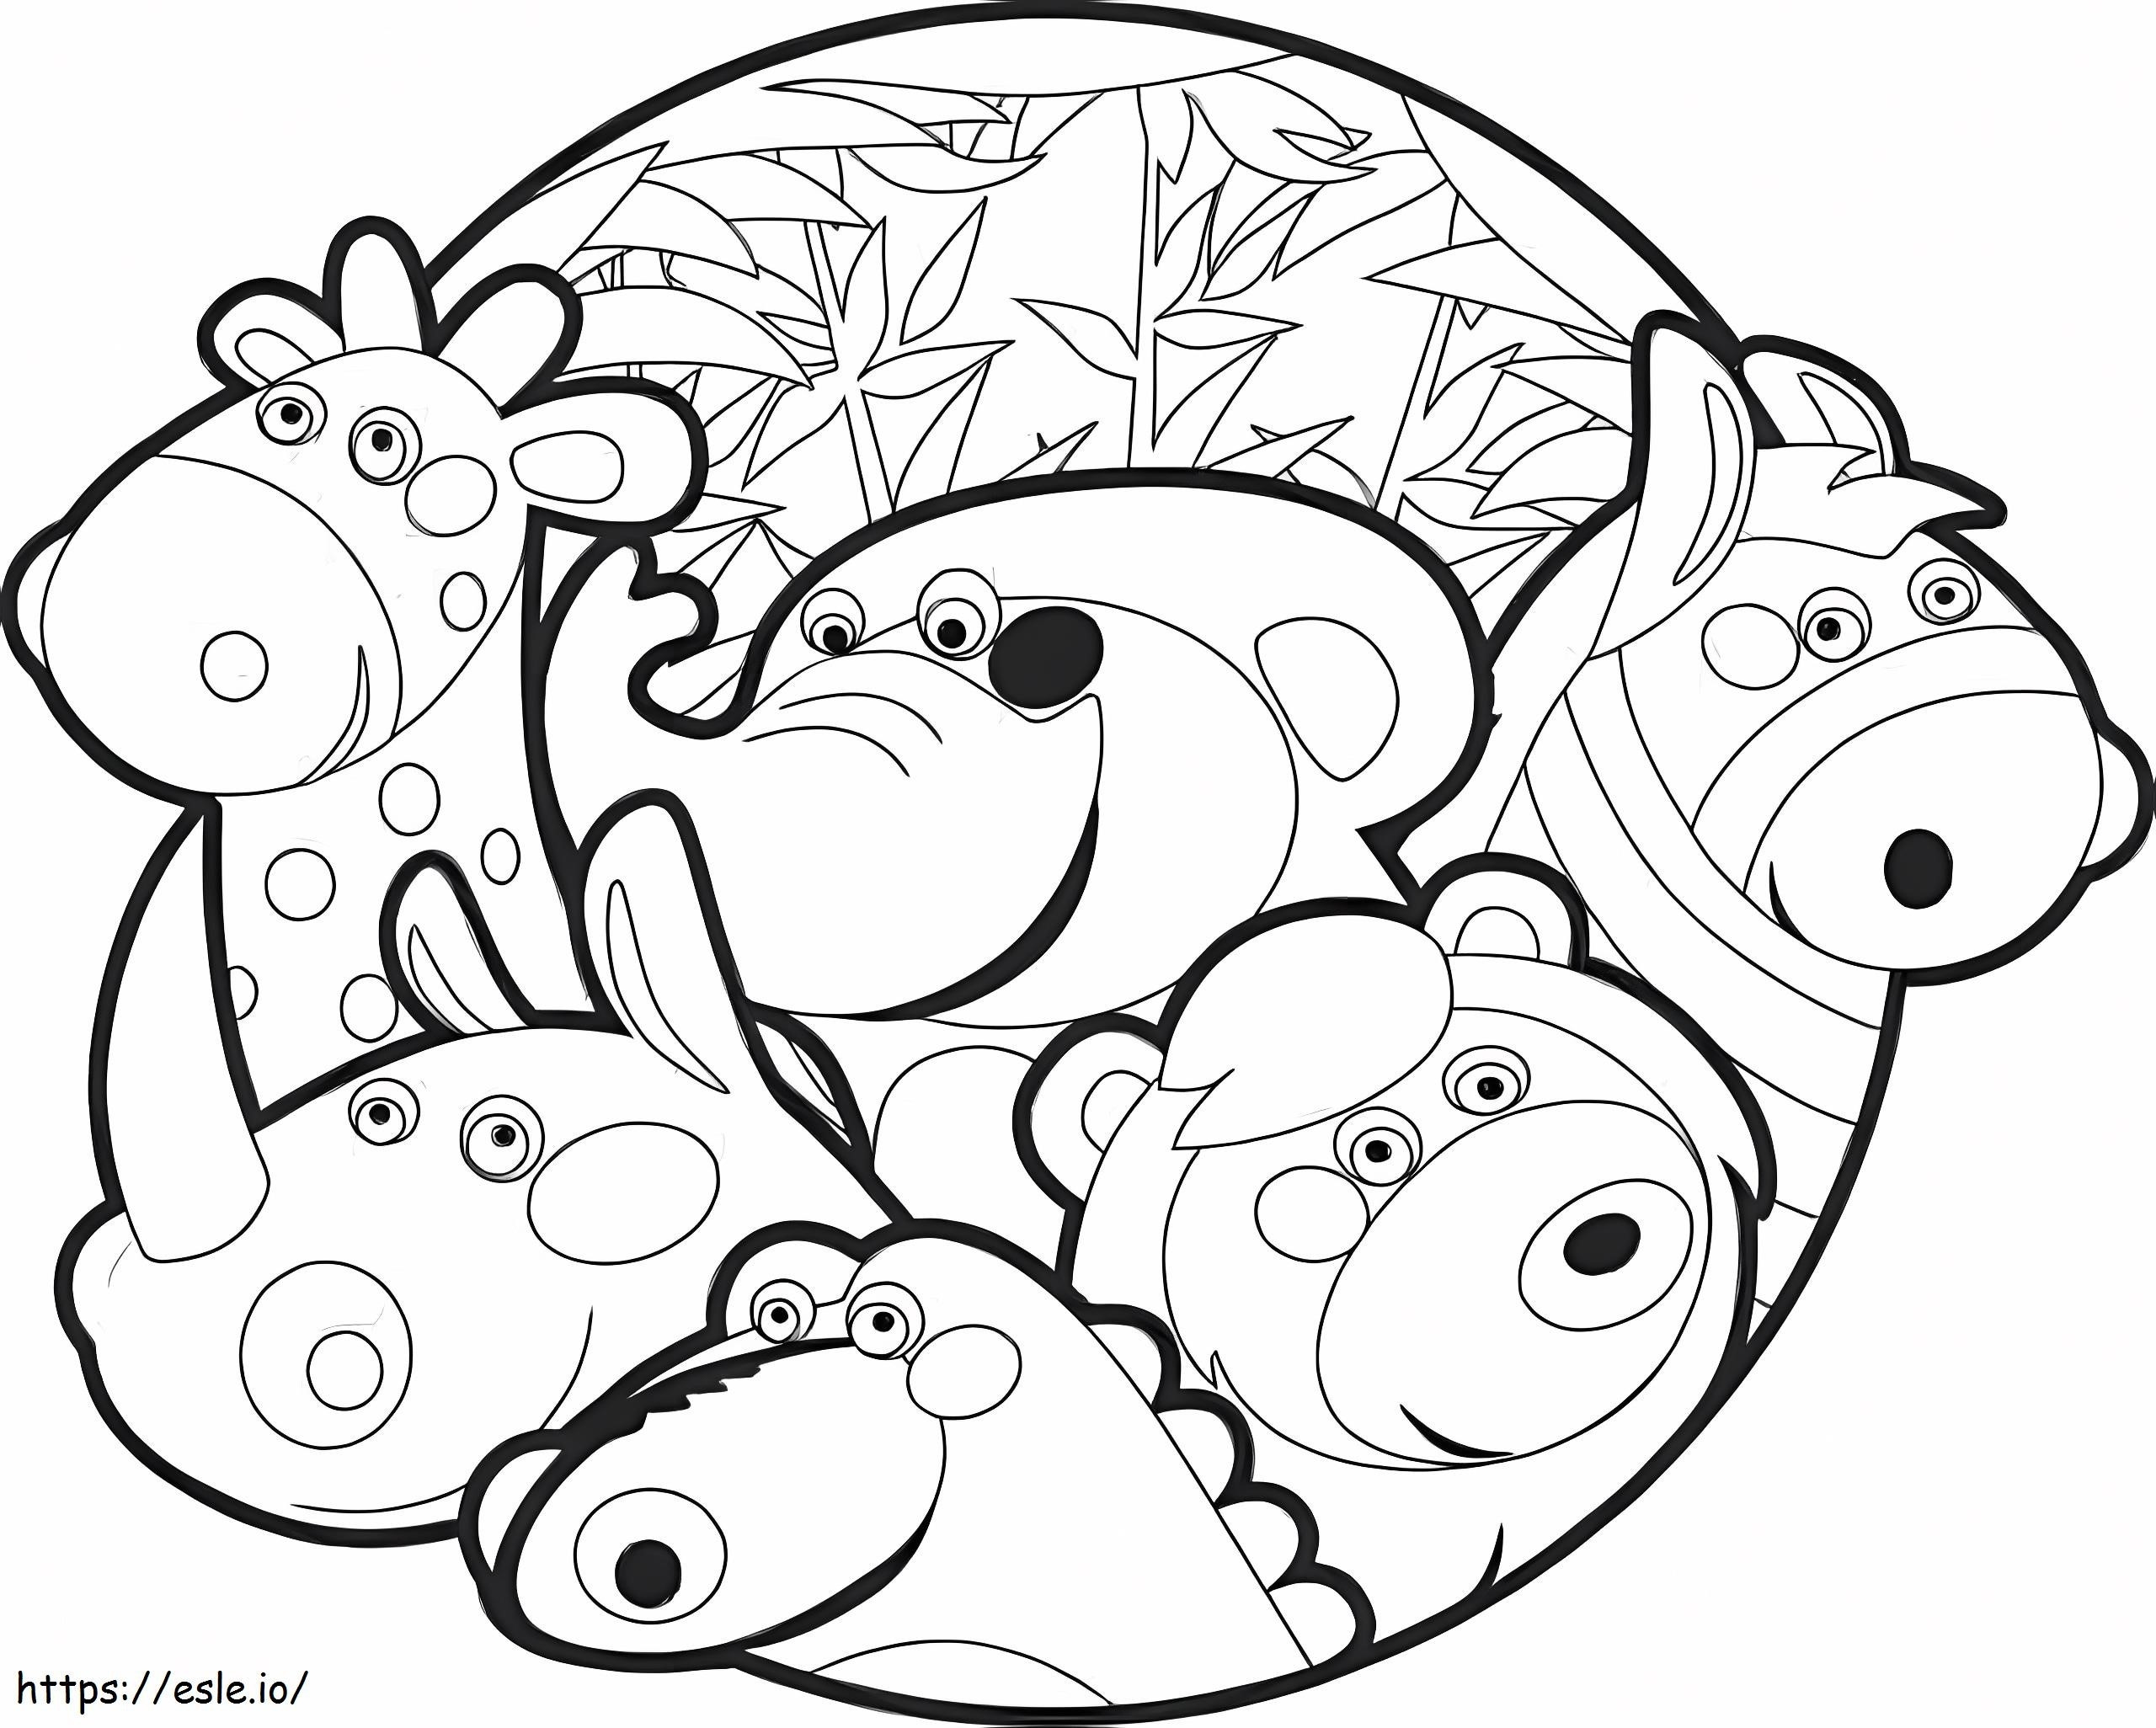 Cartoon Animal In The Zoo coloring page